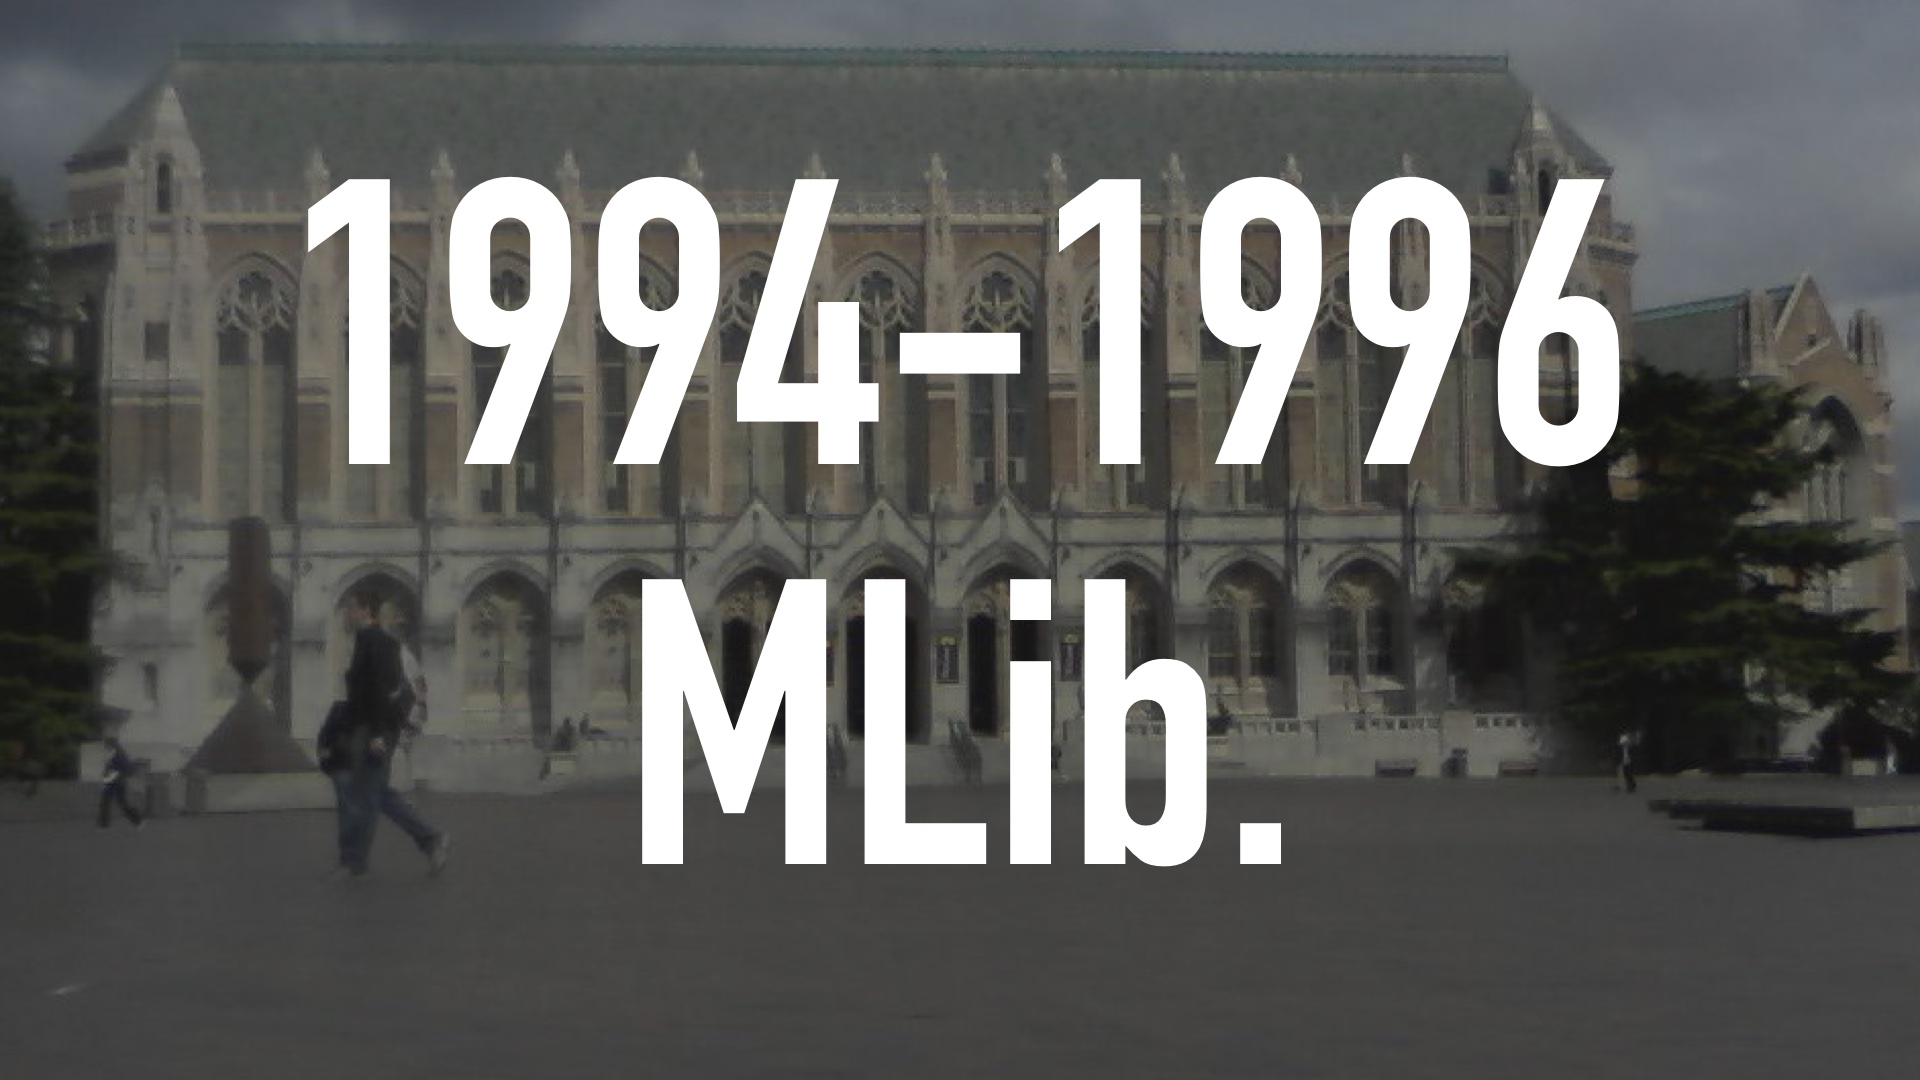 background image of old school library building and over the top of it the words 1994-1996 Mlib.